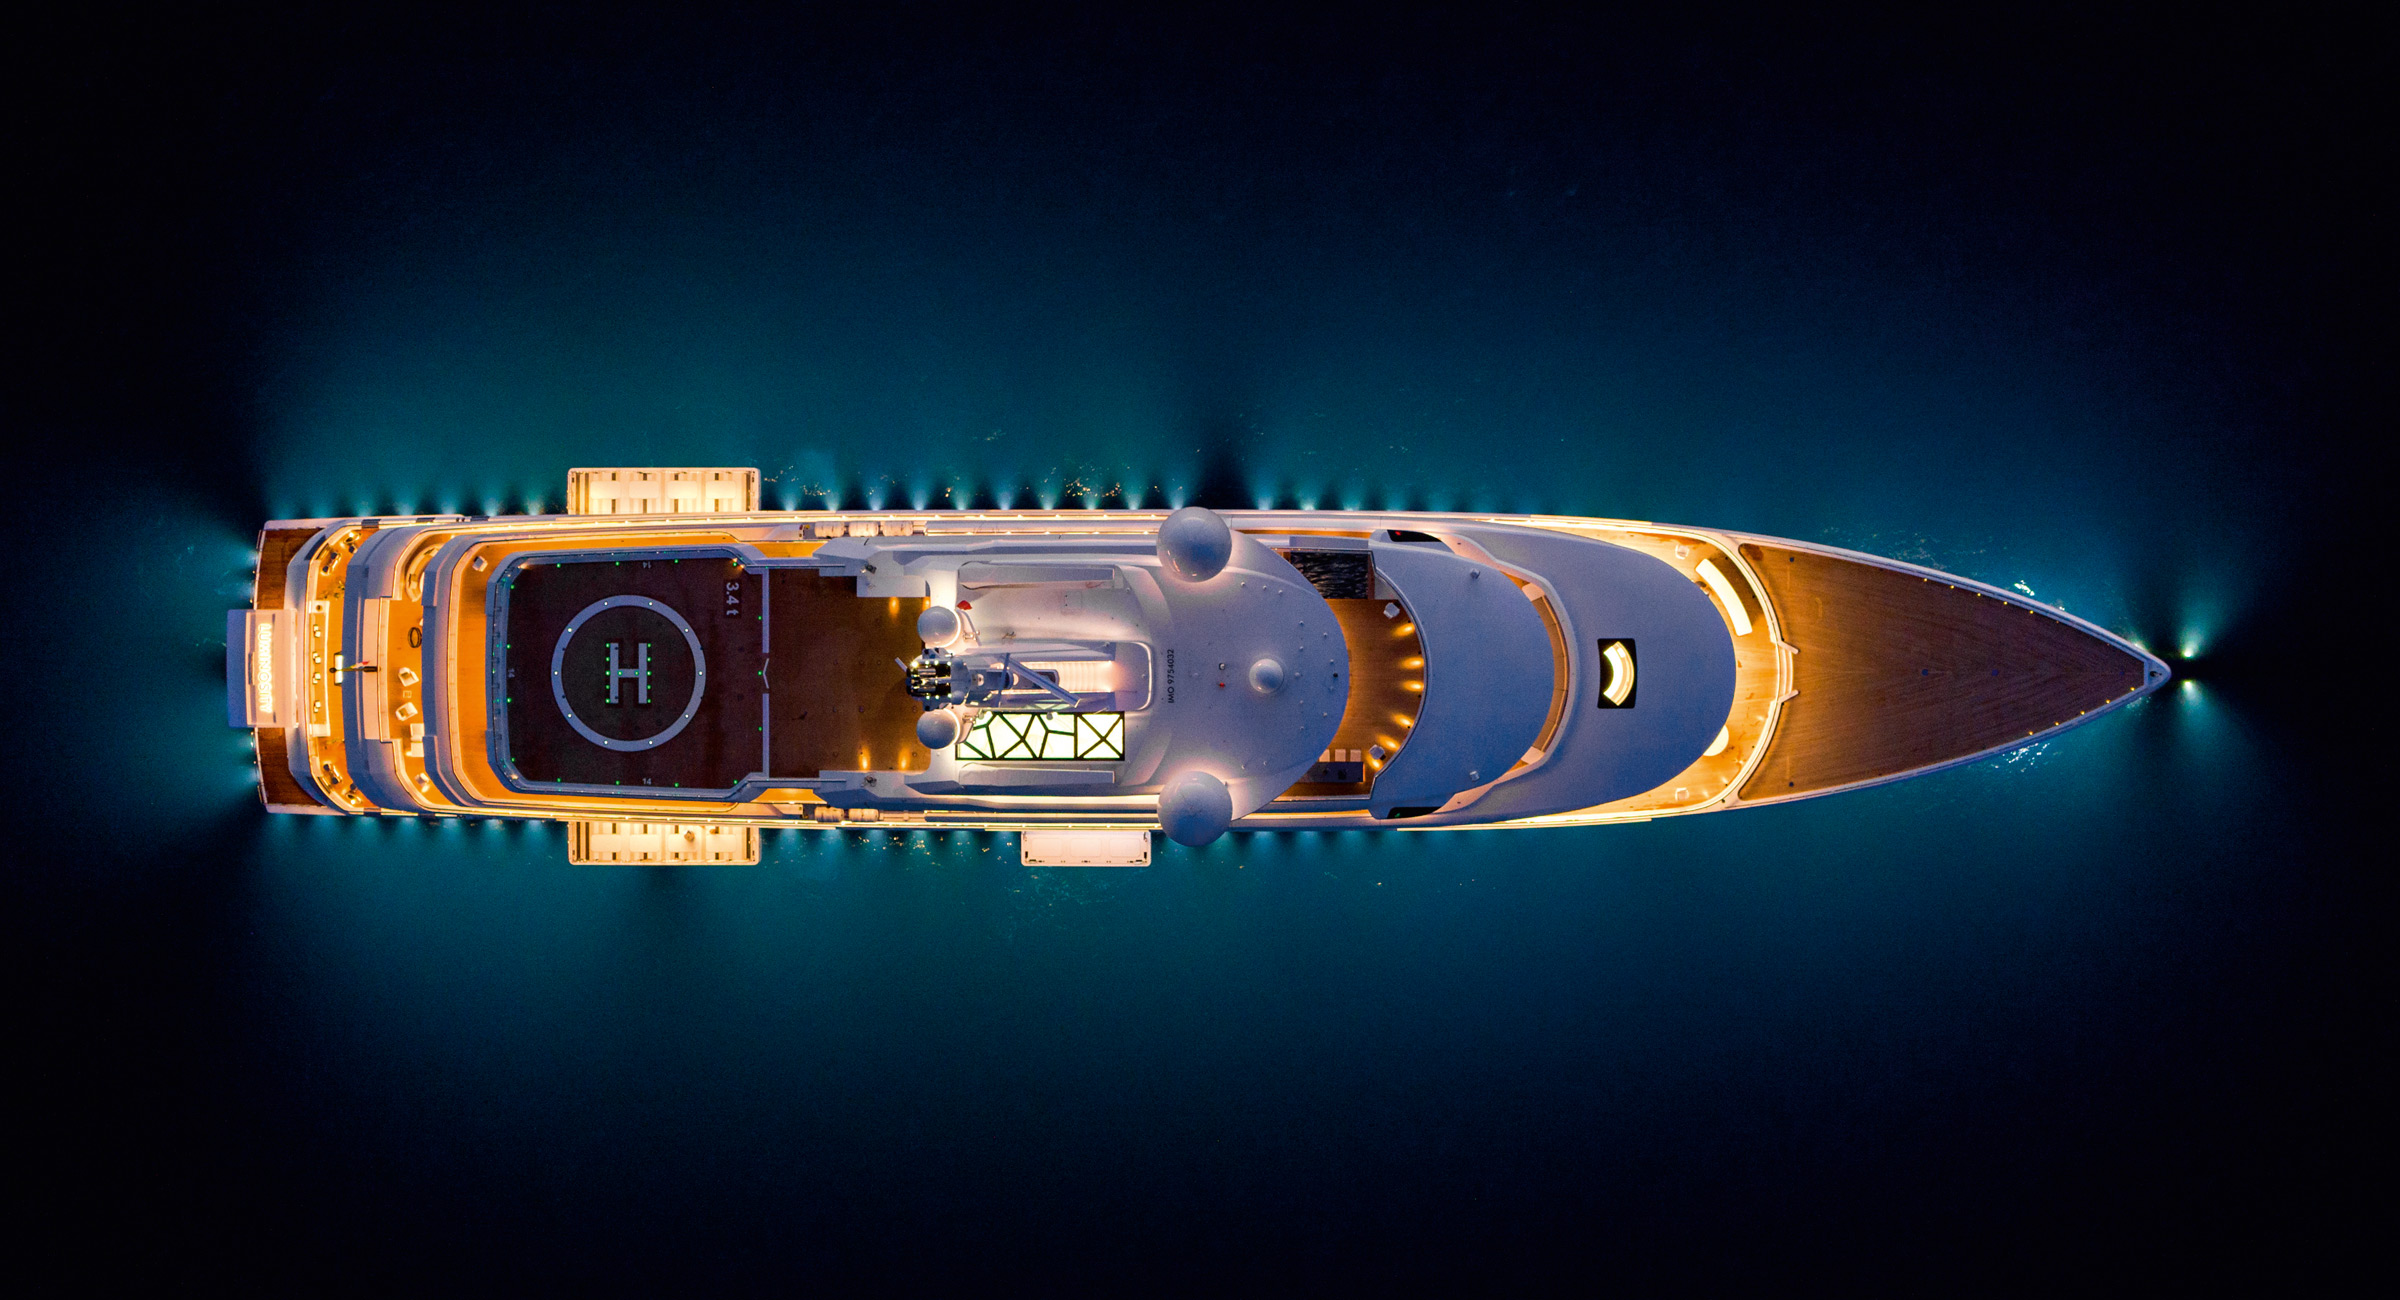 The LARGEST HYBRID YACHT EVER BUILT